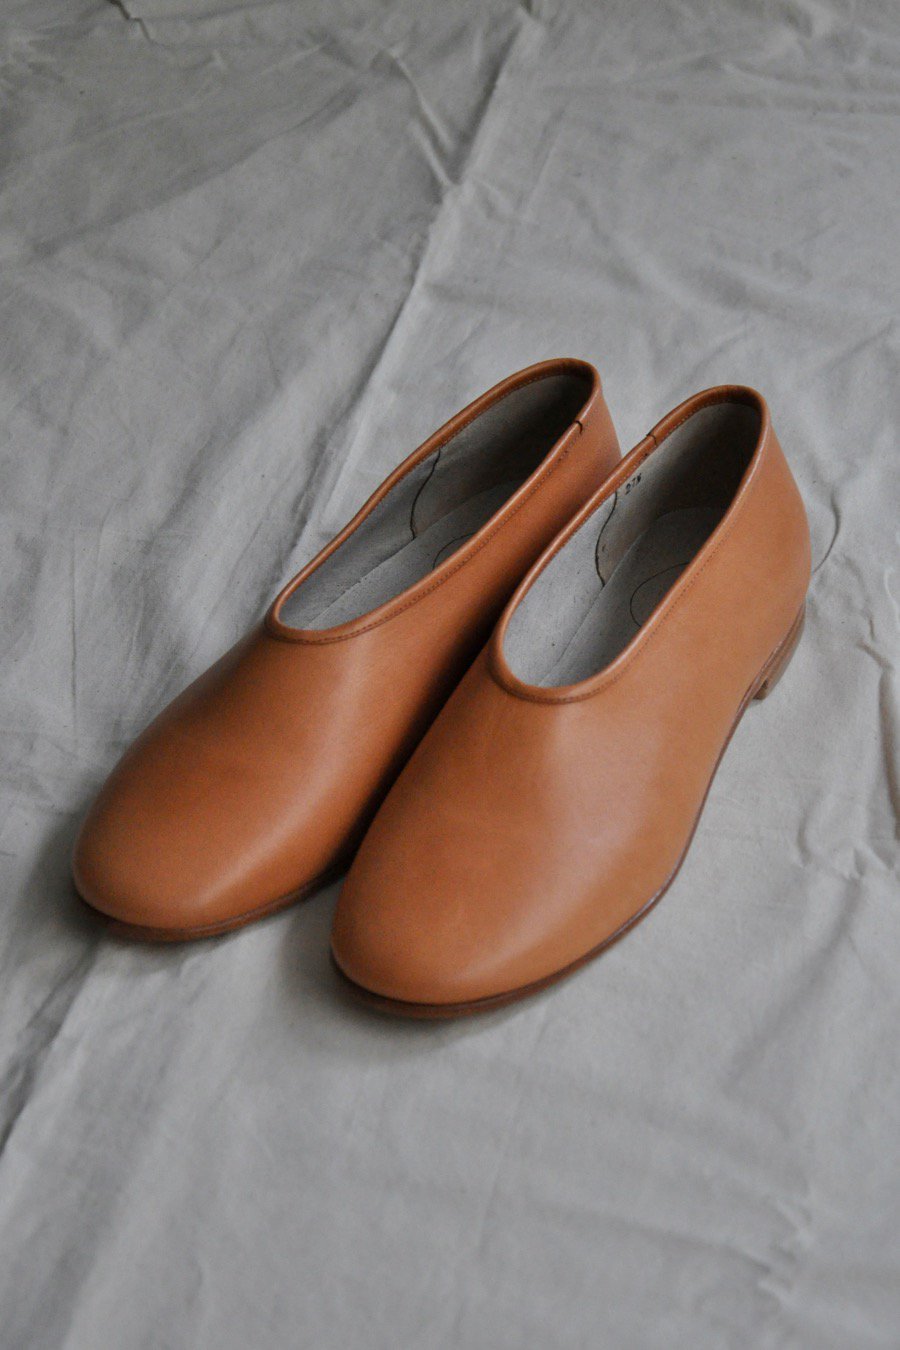 COSMIC WONDER / Naturally Tanned Leather Folk Shoes / CAMEL